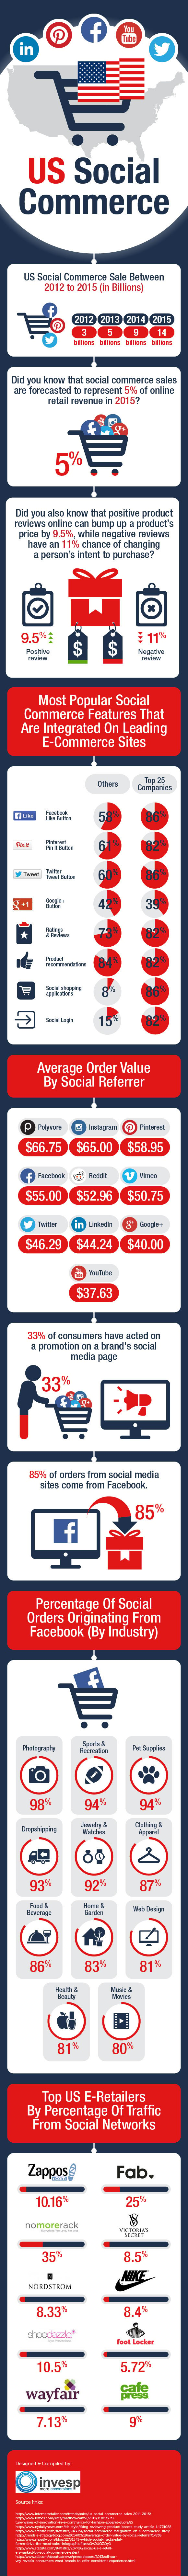 US Social Commerce - Statistics and Trends